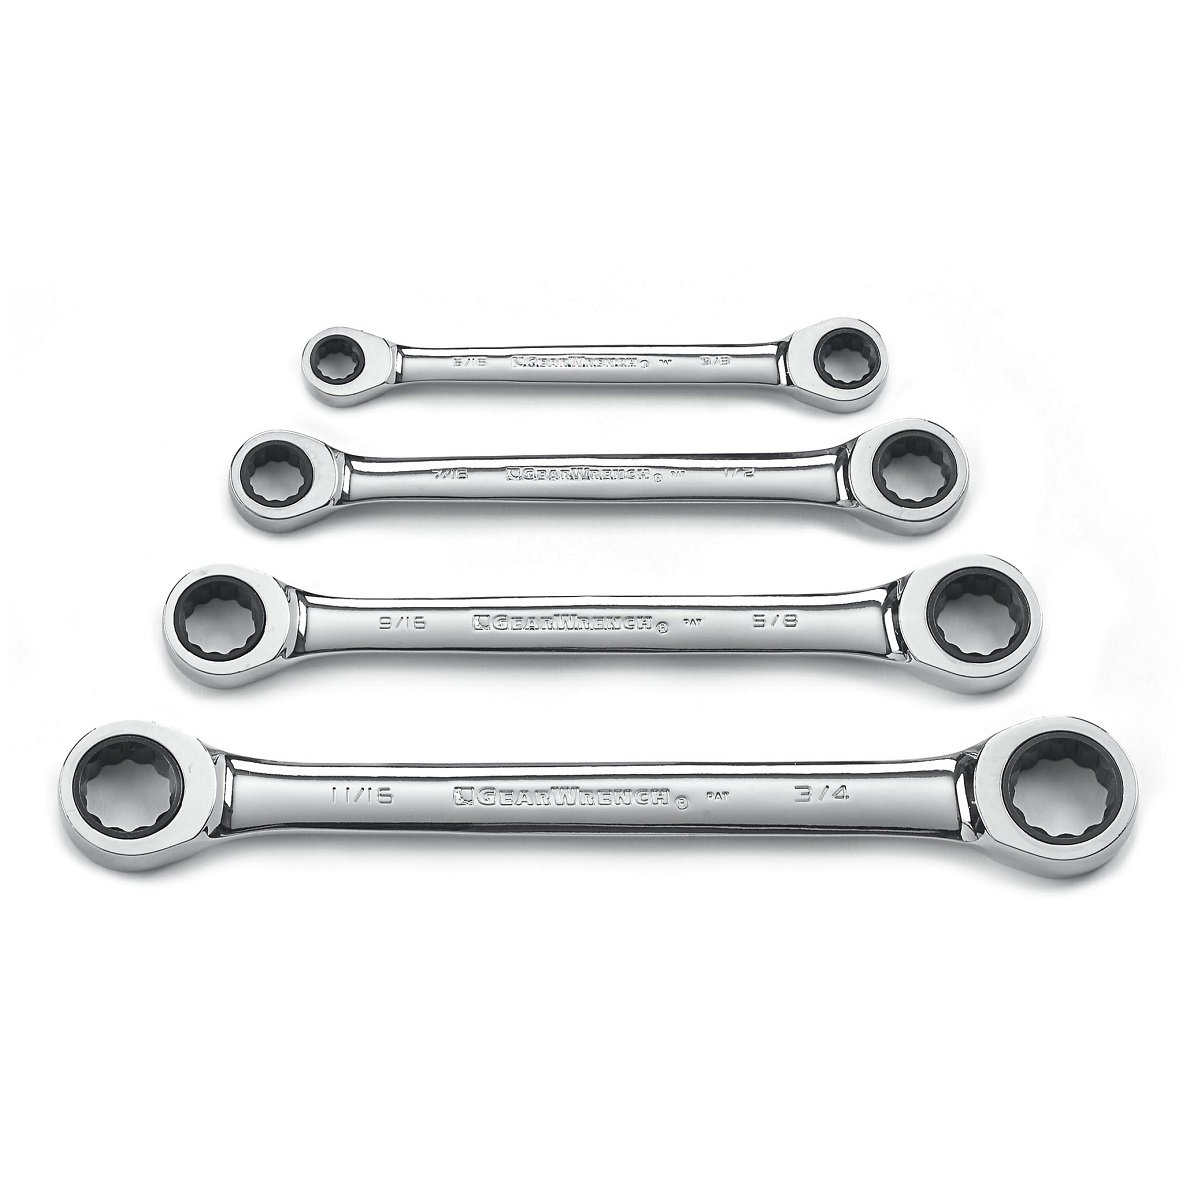 GearWrench 4 Piece Double Box Ratcheting Wrench Spanner Set SAE 9240D